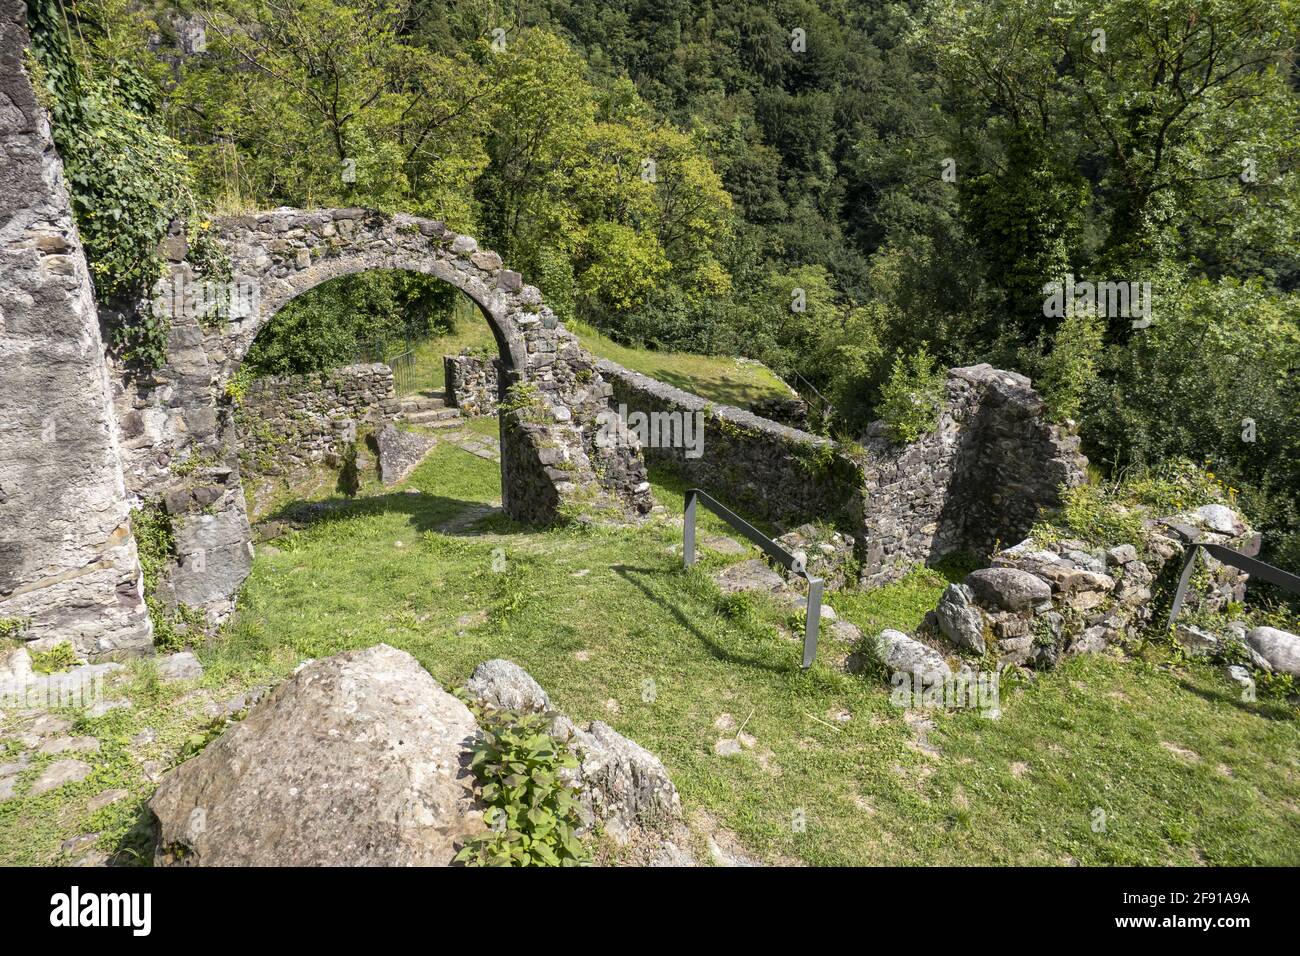 Ruins of Tasso Family's Old Palace; ancient medieval village in Lombardy, Italy Stock Photo